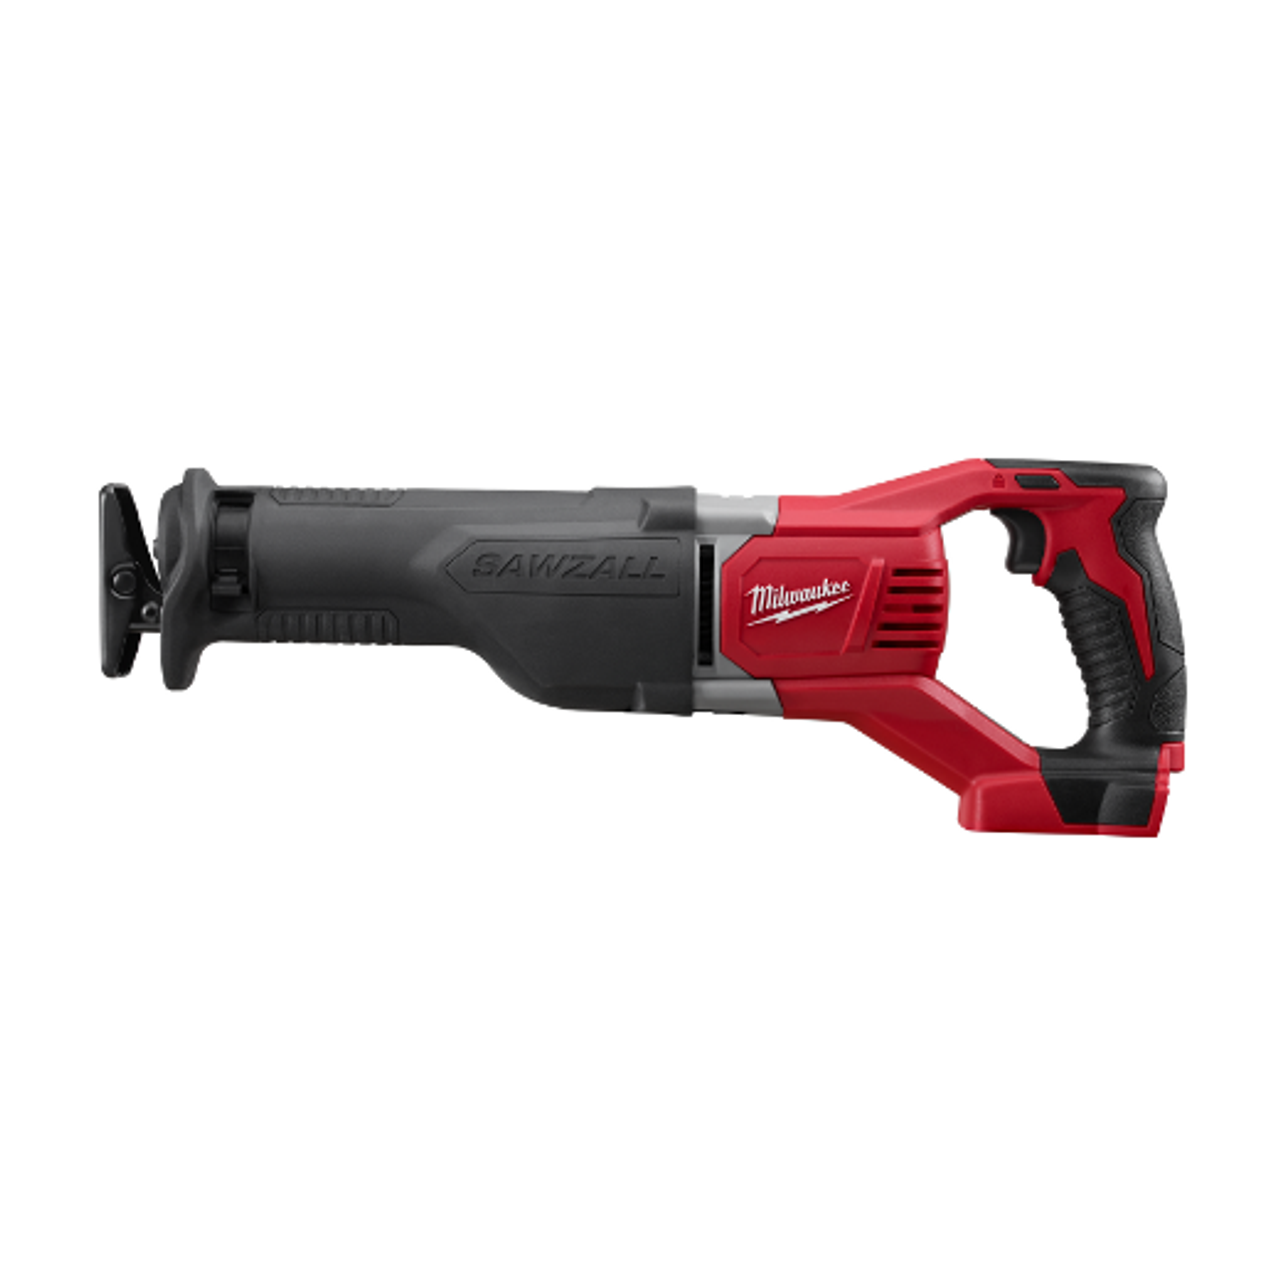 M18? SAWZALL? Reciprocating Saw (Tool Only)